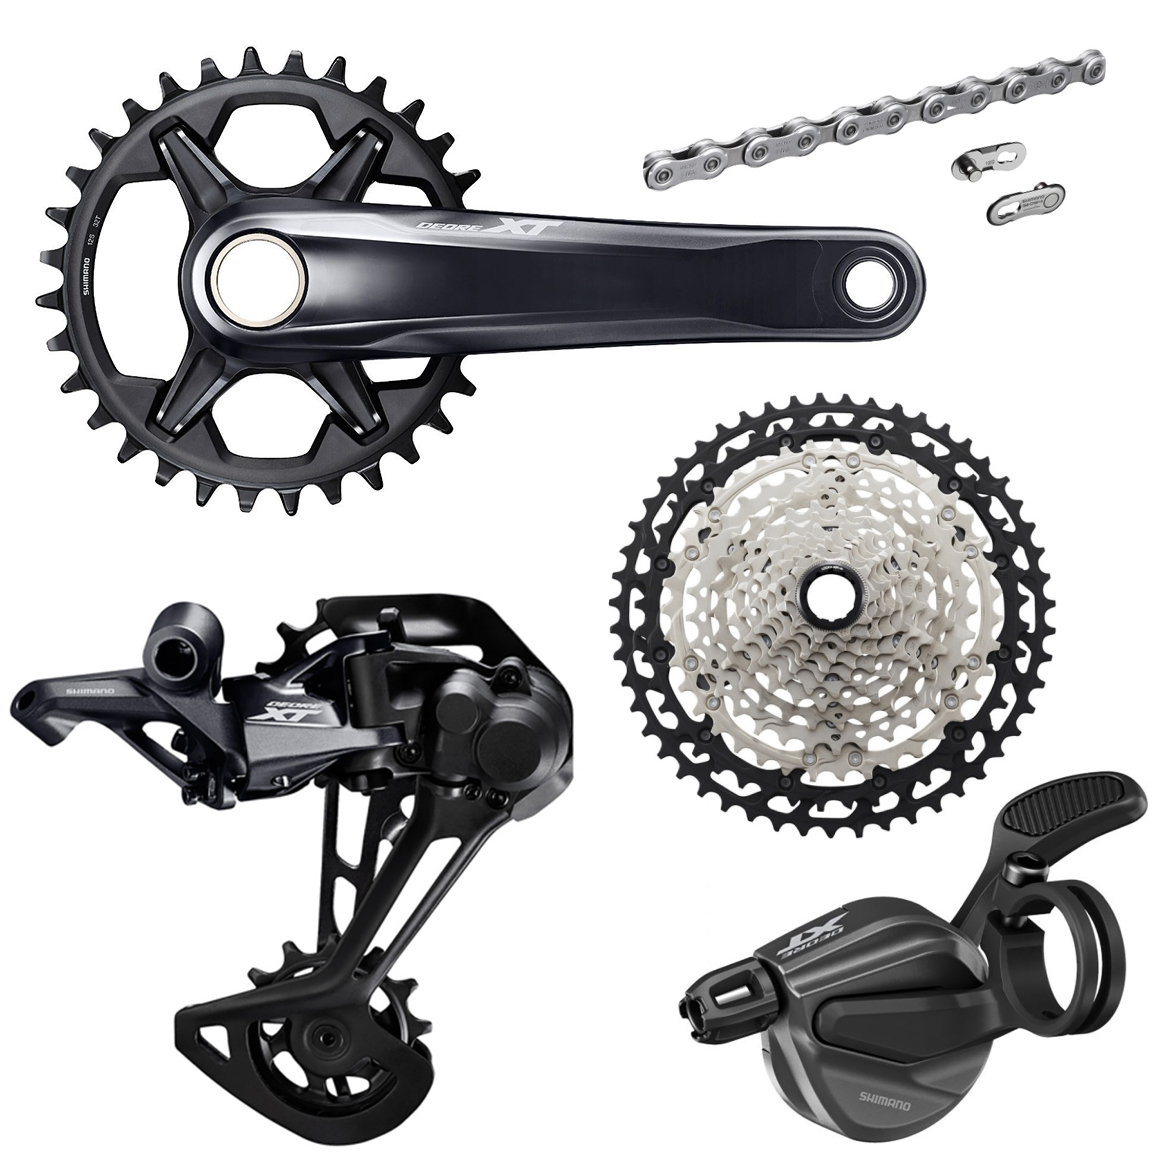 a little Thigh magnet Shimano XT M8100 1x12 Transmission Groupset